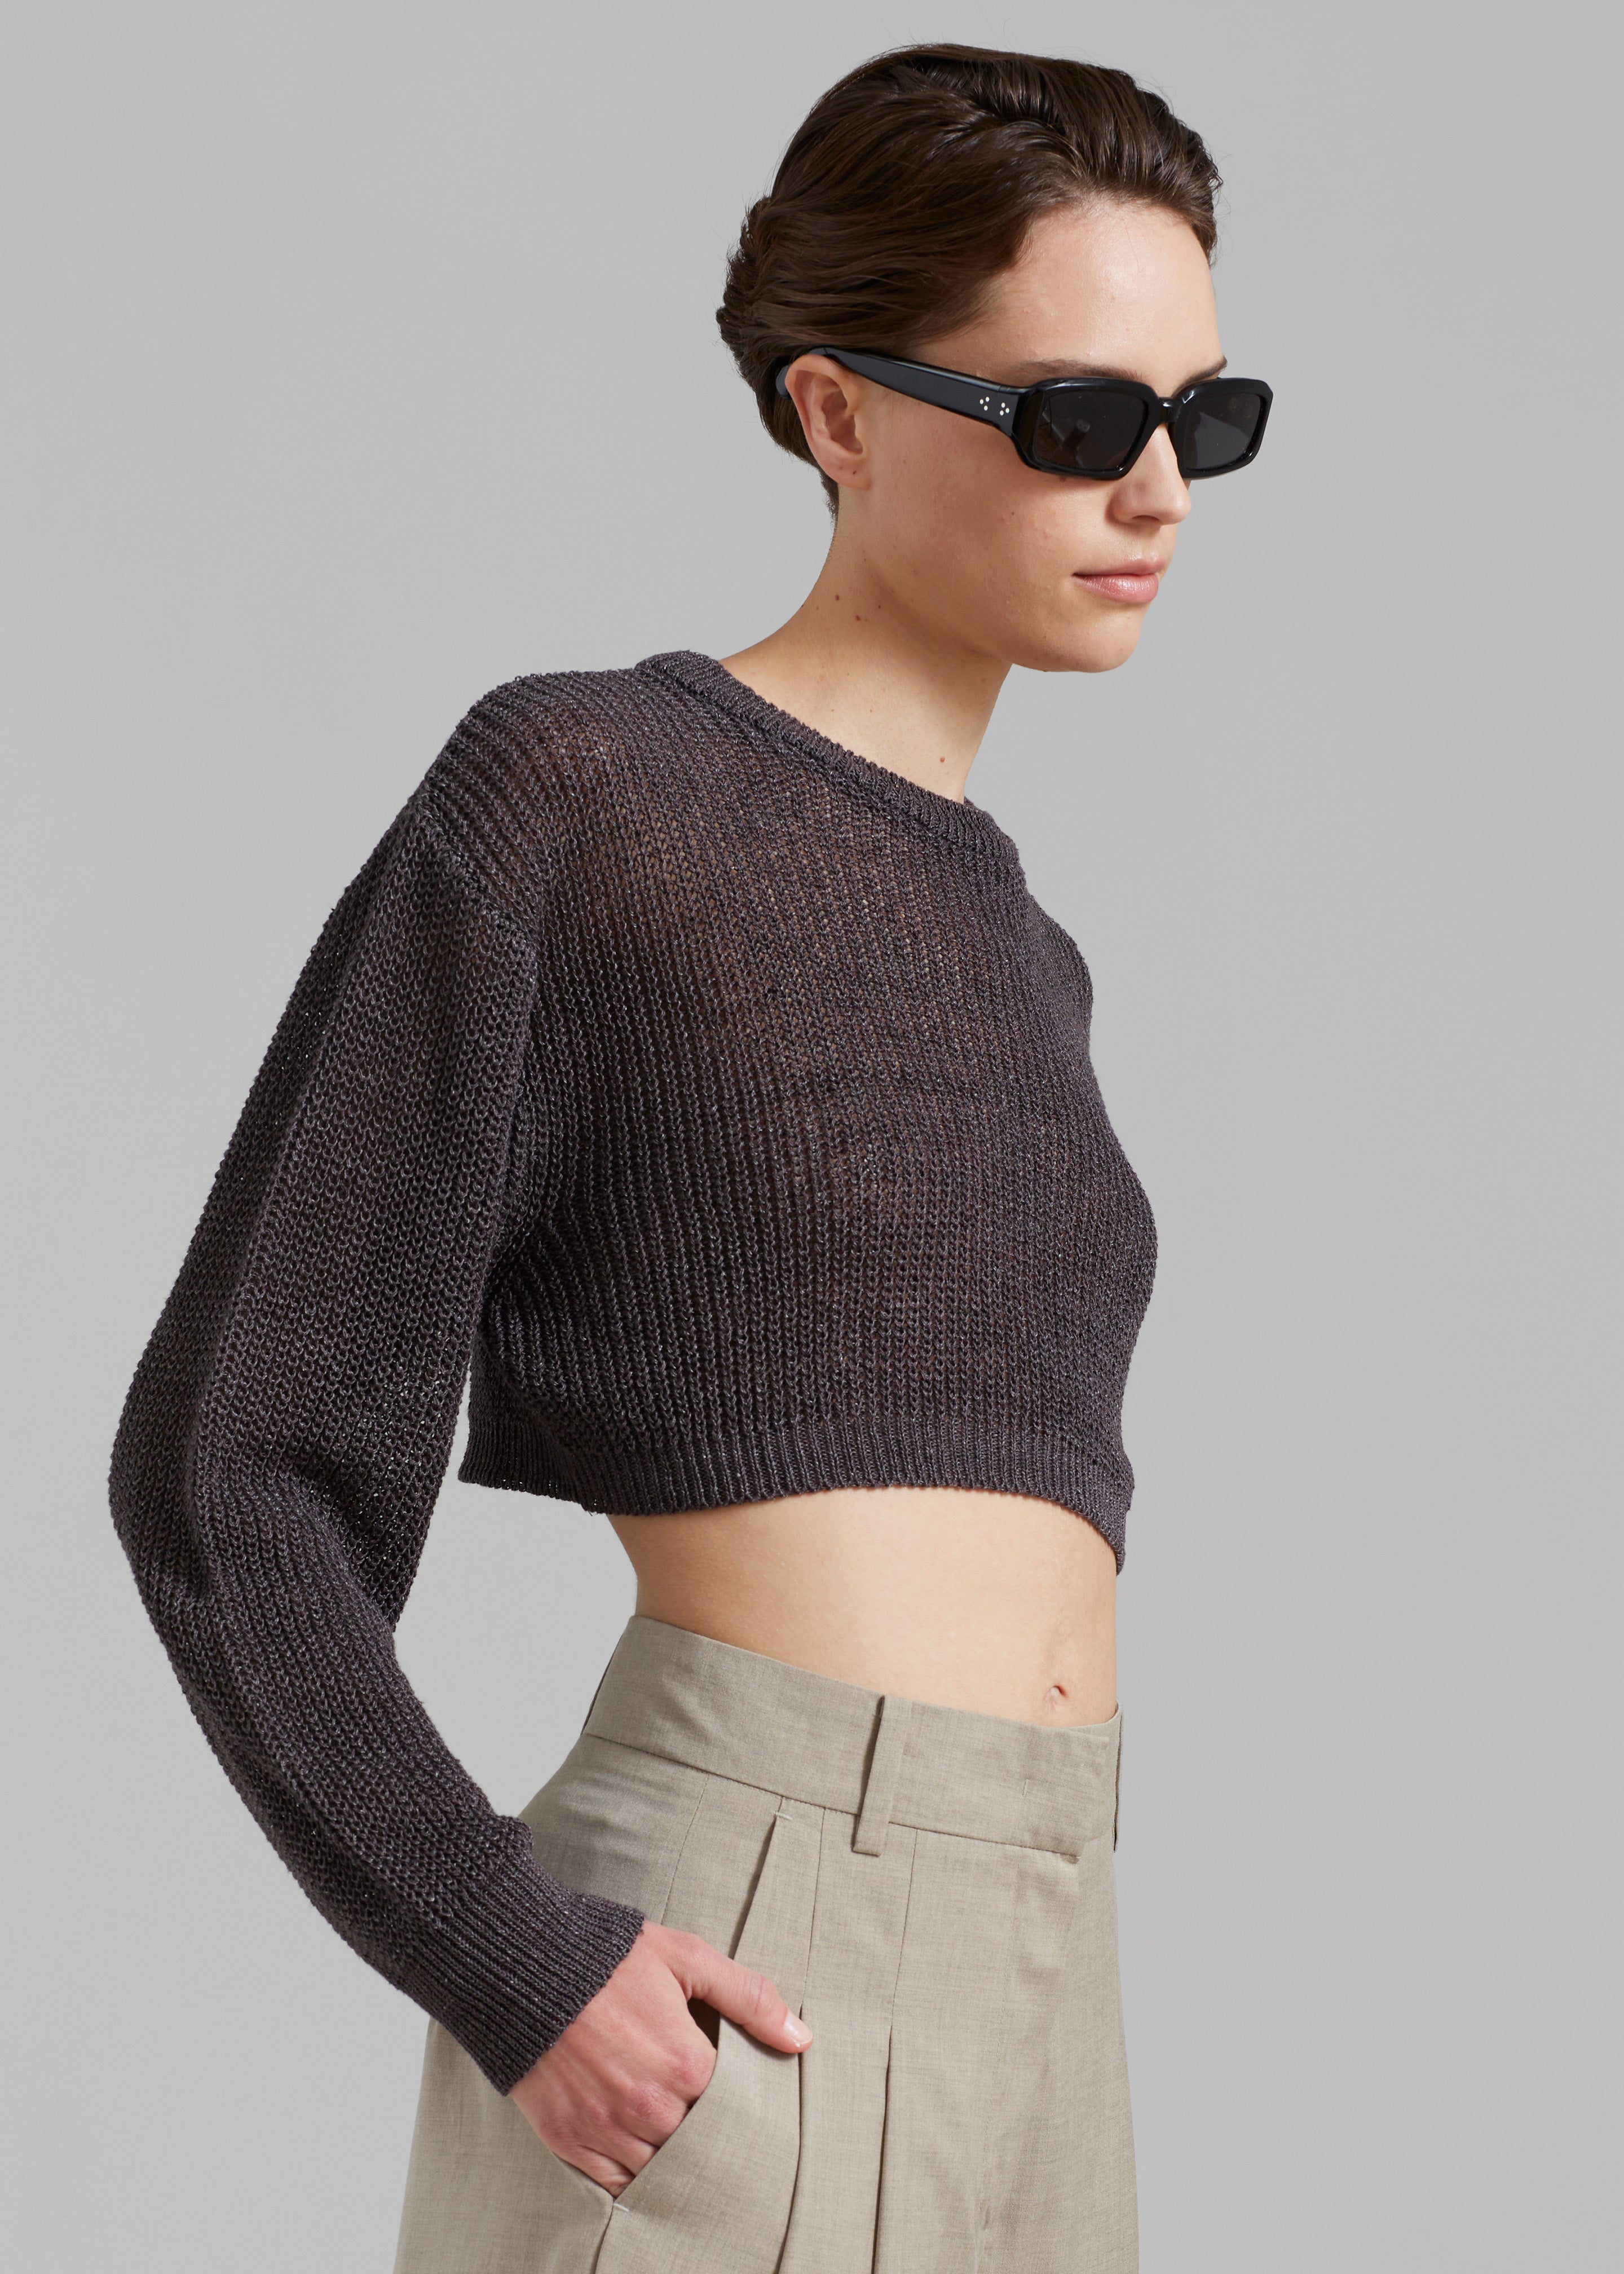 Abi Cropped Knit Top - Charcoal - 6